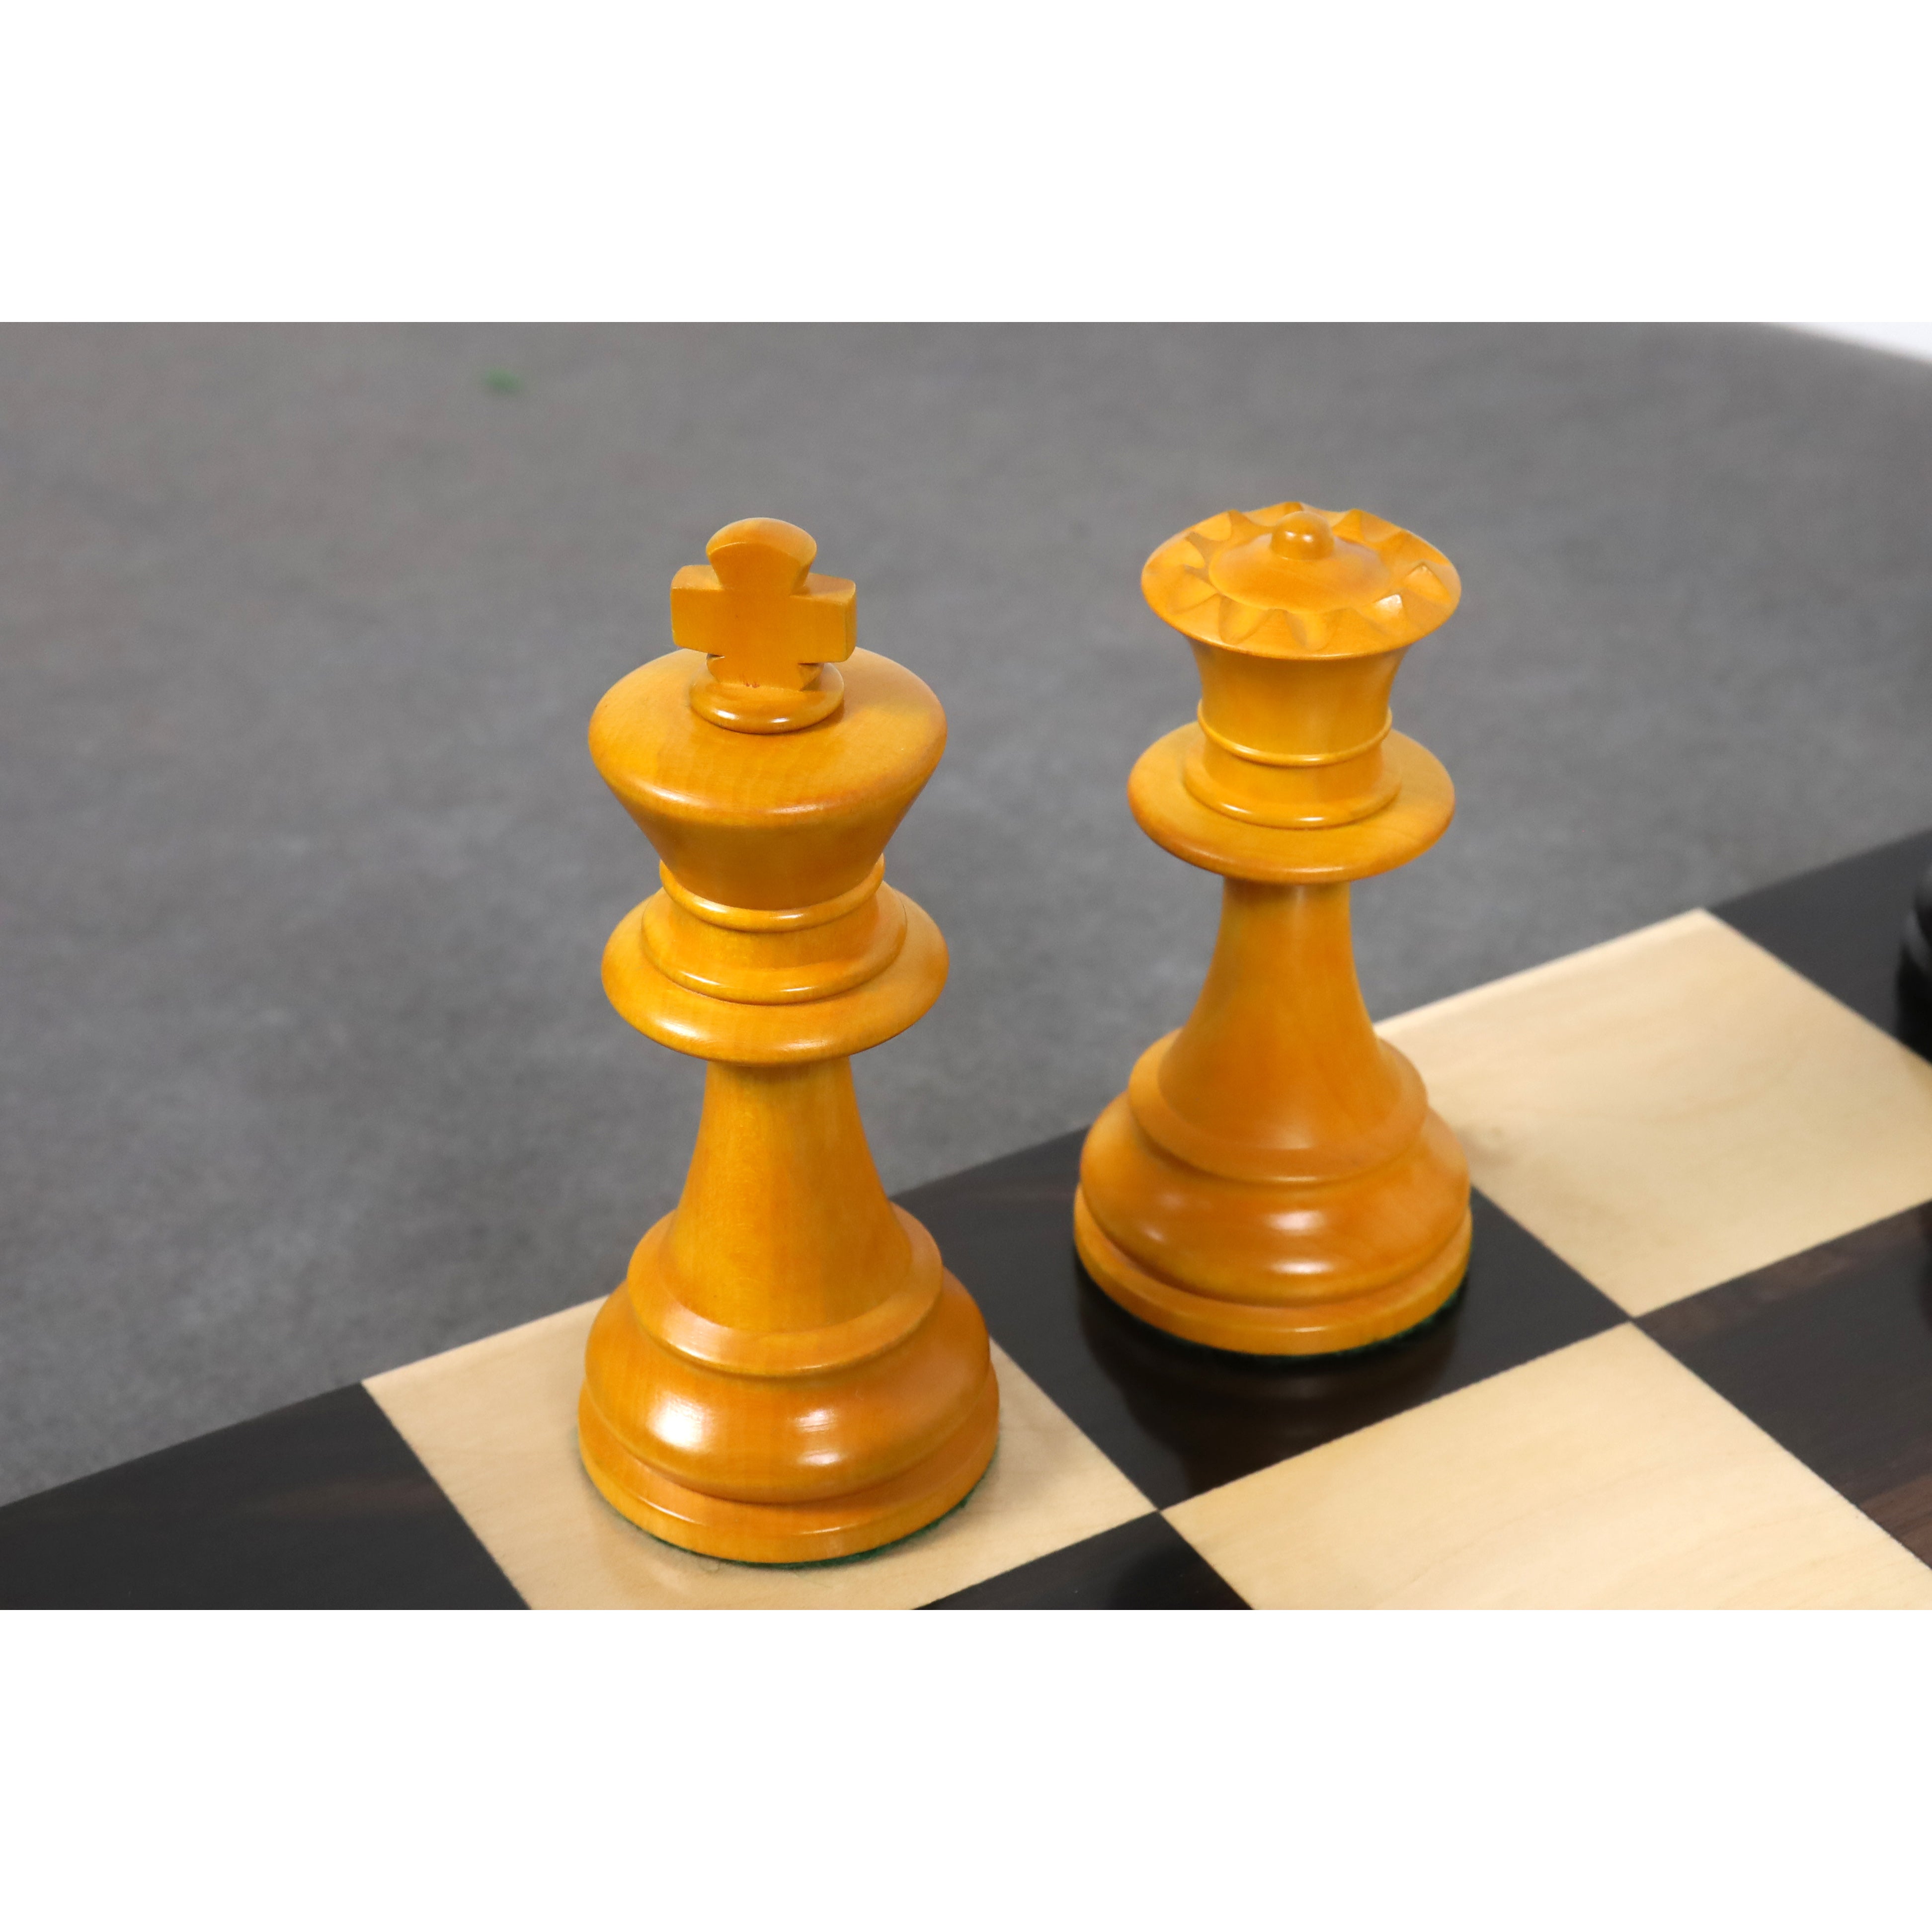 Candidates Tournament - The Path to The World Chess Championship - Henry  Chess Sets